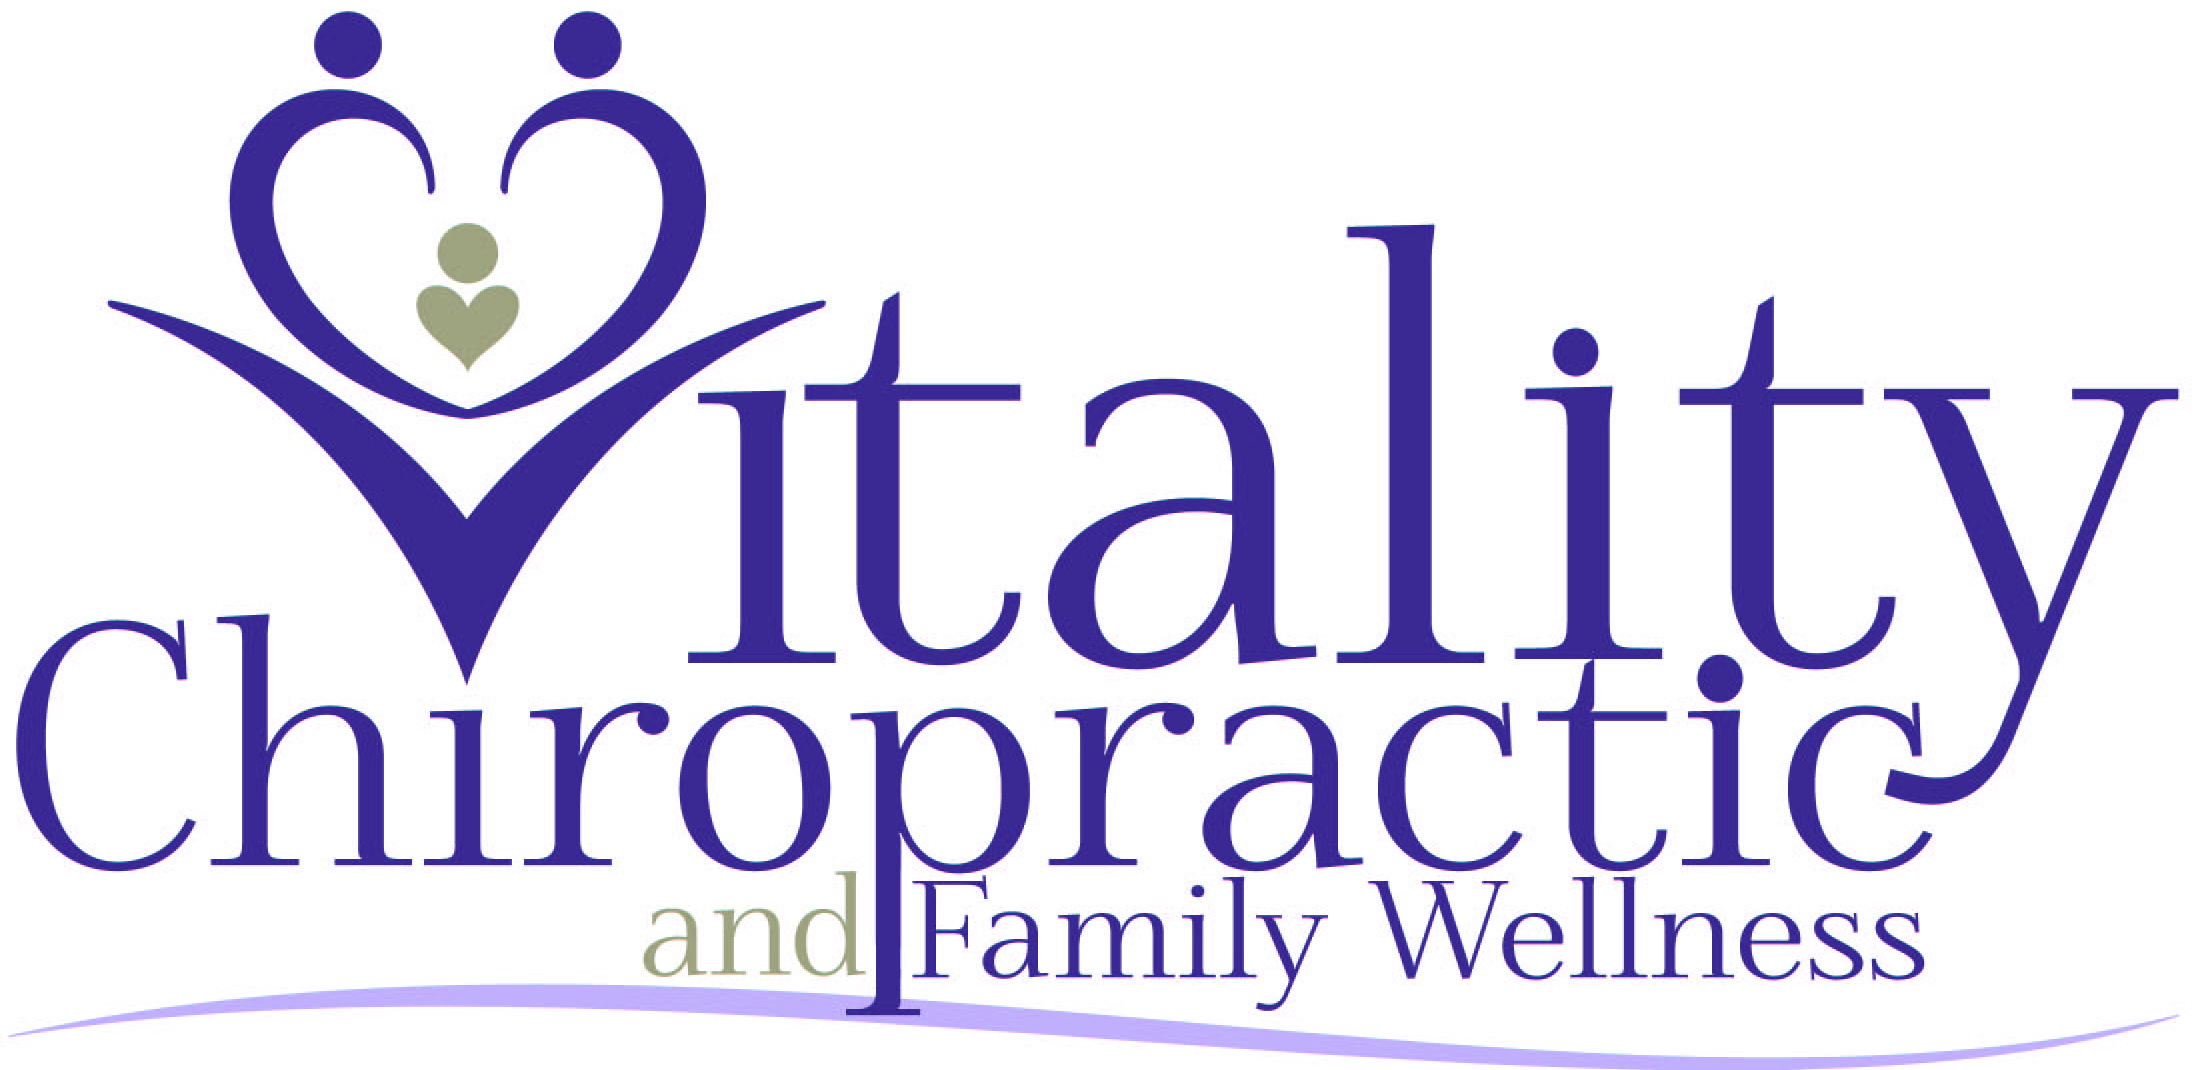 Sponsor Vitality Chiropractic and Family Wellness